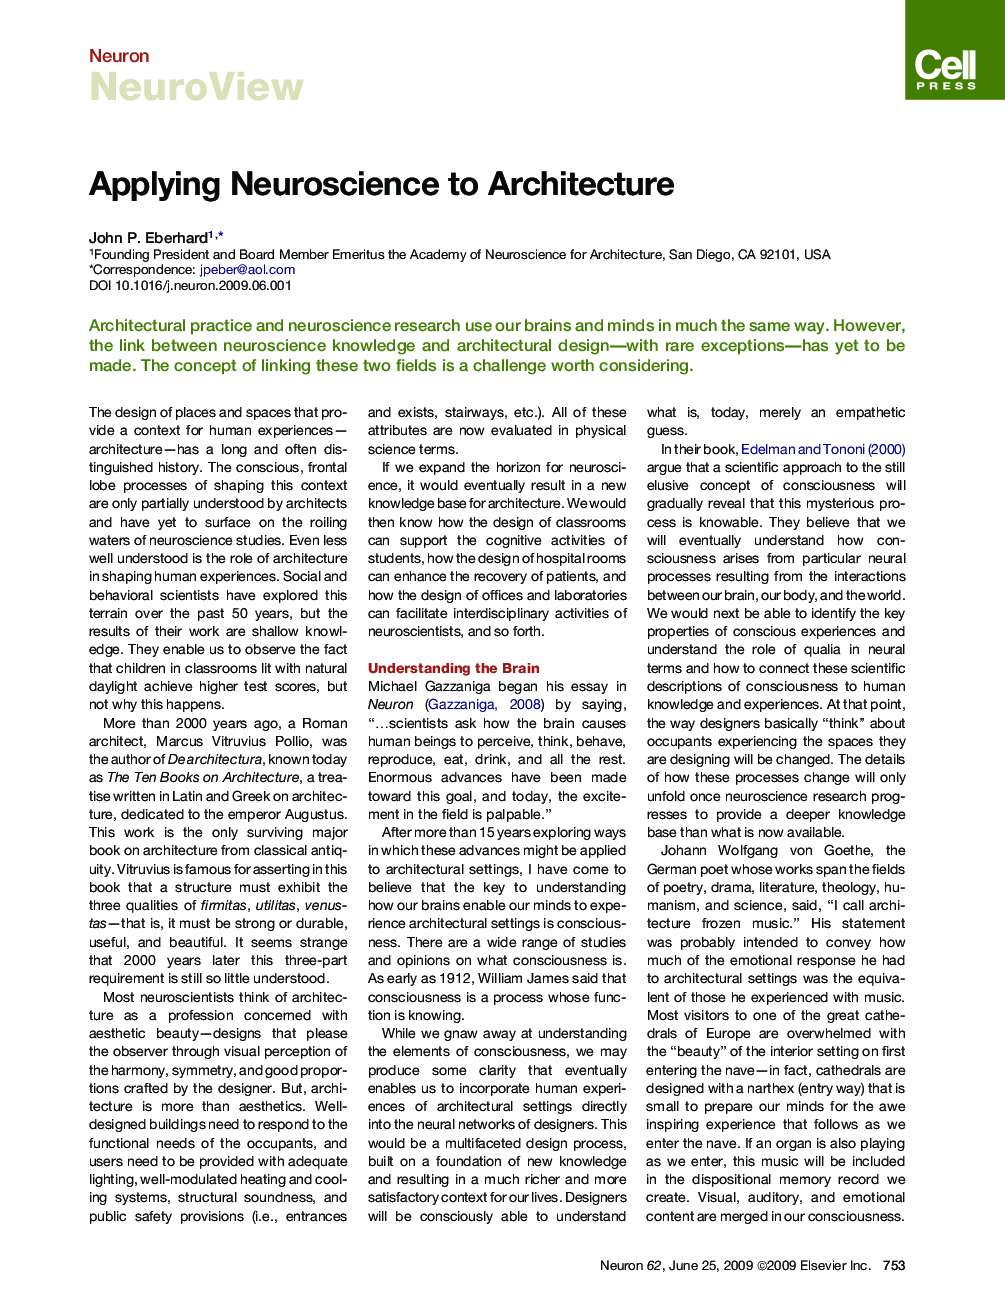 Applying Neuroscience to Architecture